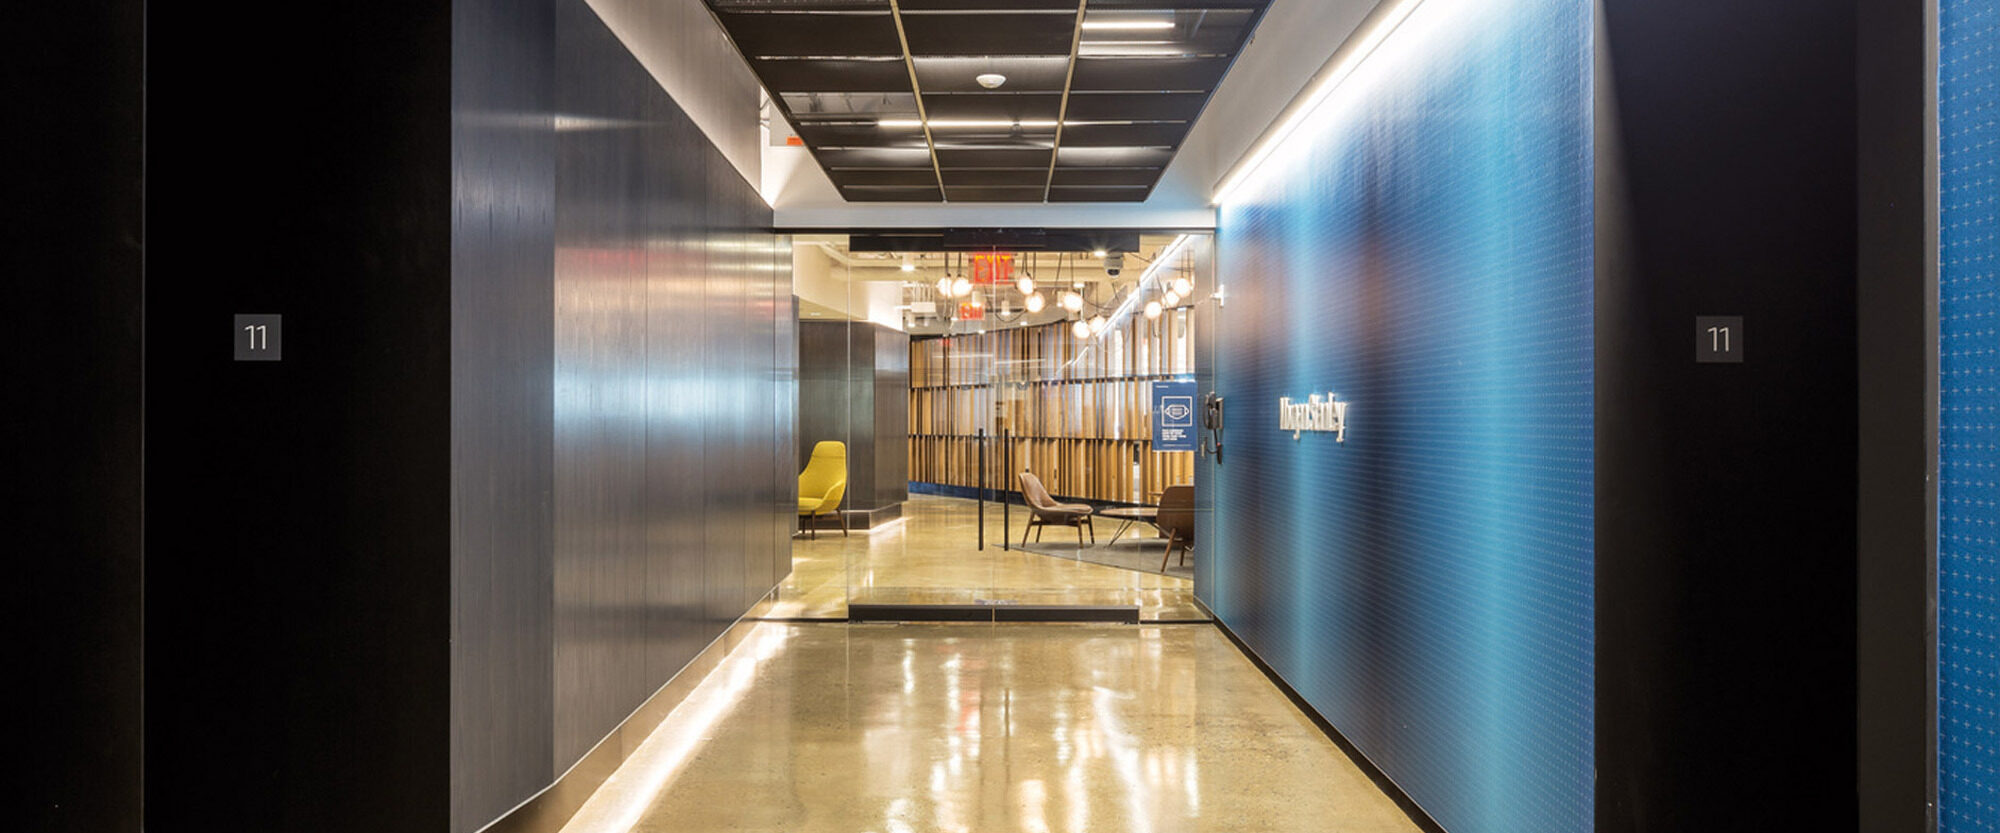 Modern office corridor with reflective polished concrete floors, contrasting blue-grey textured walls, and exposed ceiling structure showcasing a blend of industrial and contemporary design elements. Evening lighting adds warmth to the space.